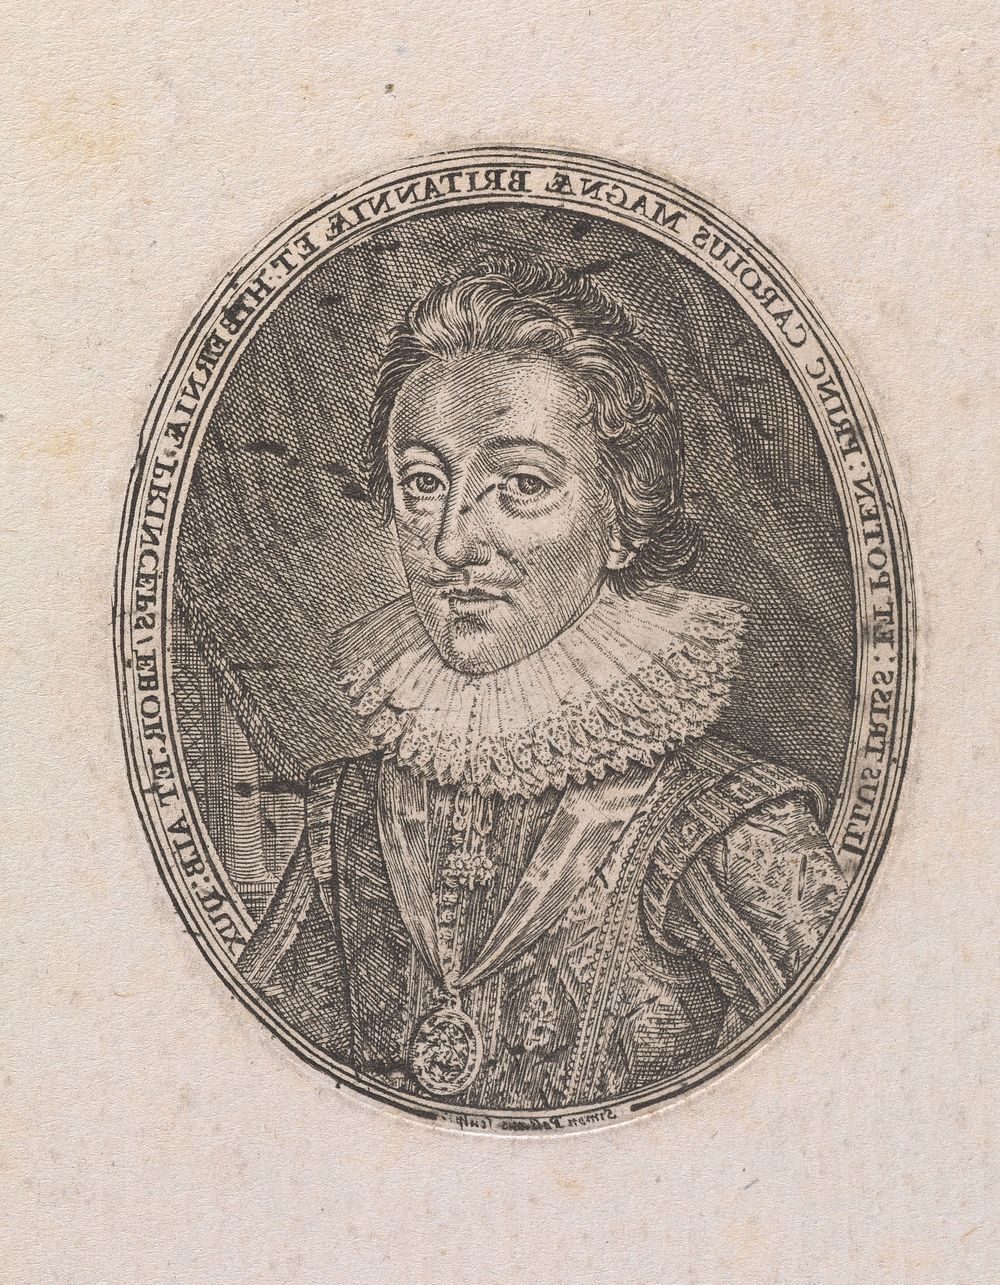 King Charles I as Prince of Wales. Engraving by S. de Passe, 1616.